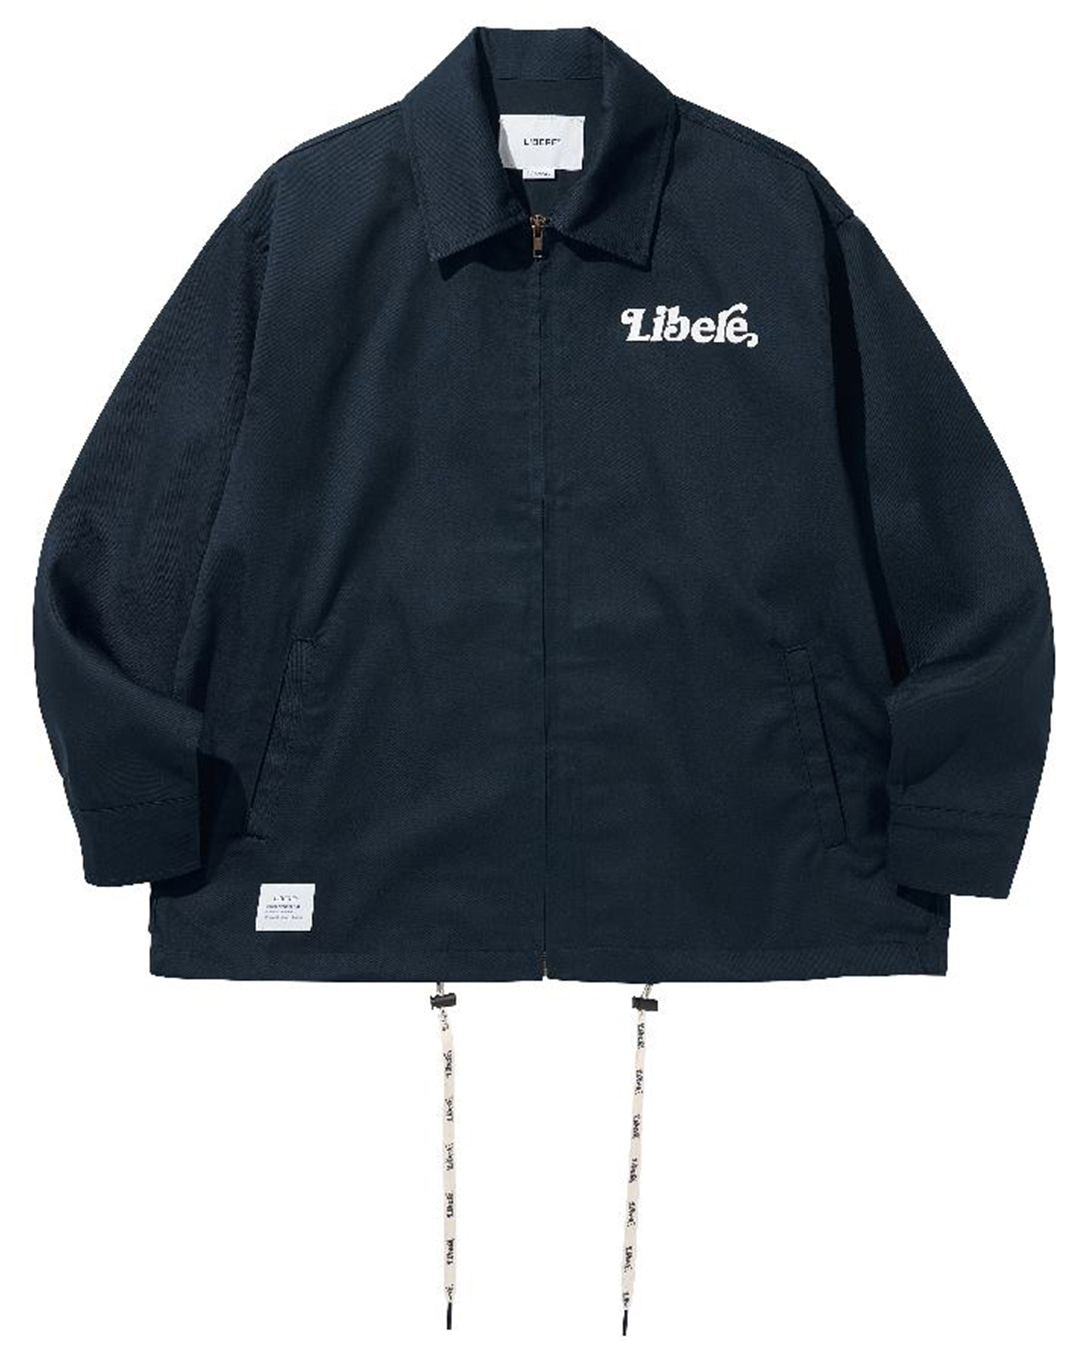 FOREVER DRIZZLER JACKET / NAVY,BTS,JAPAN,FASHIONBRAND,LIBERE